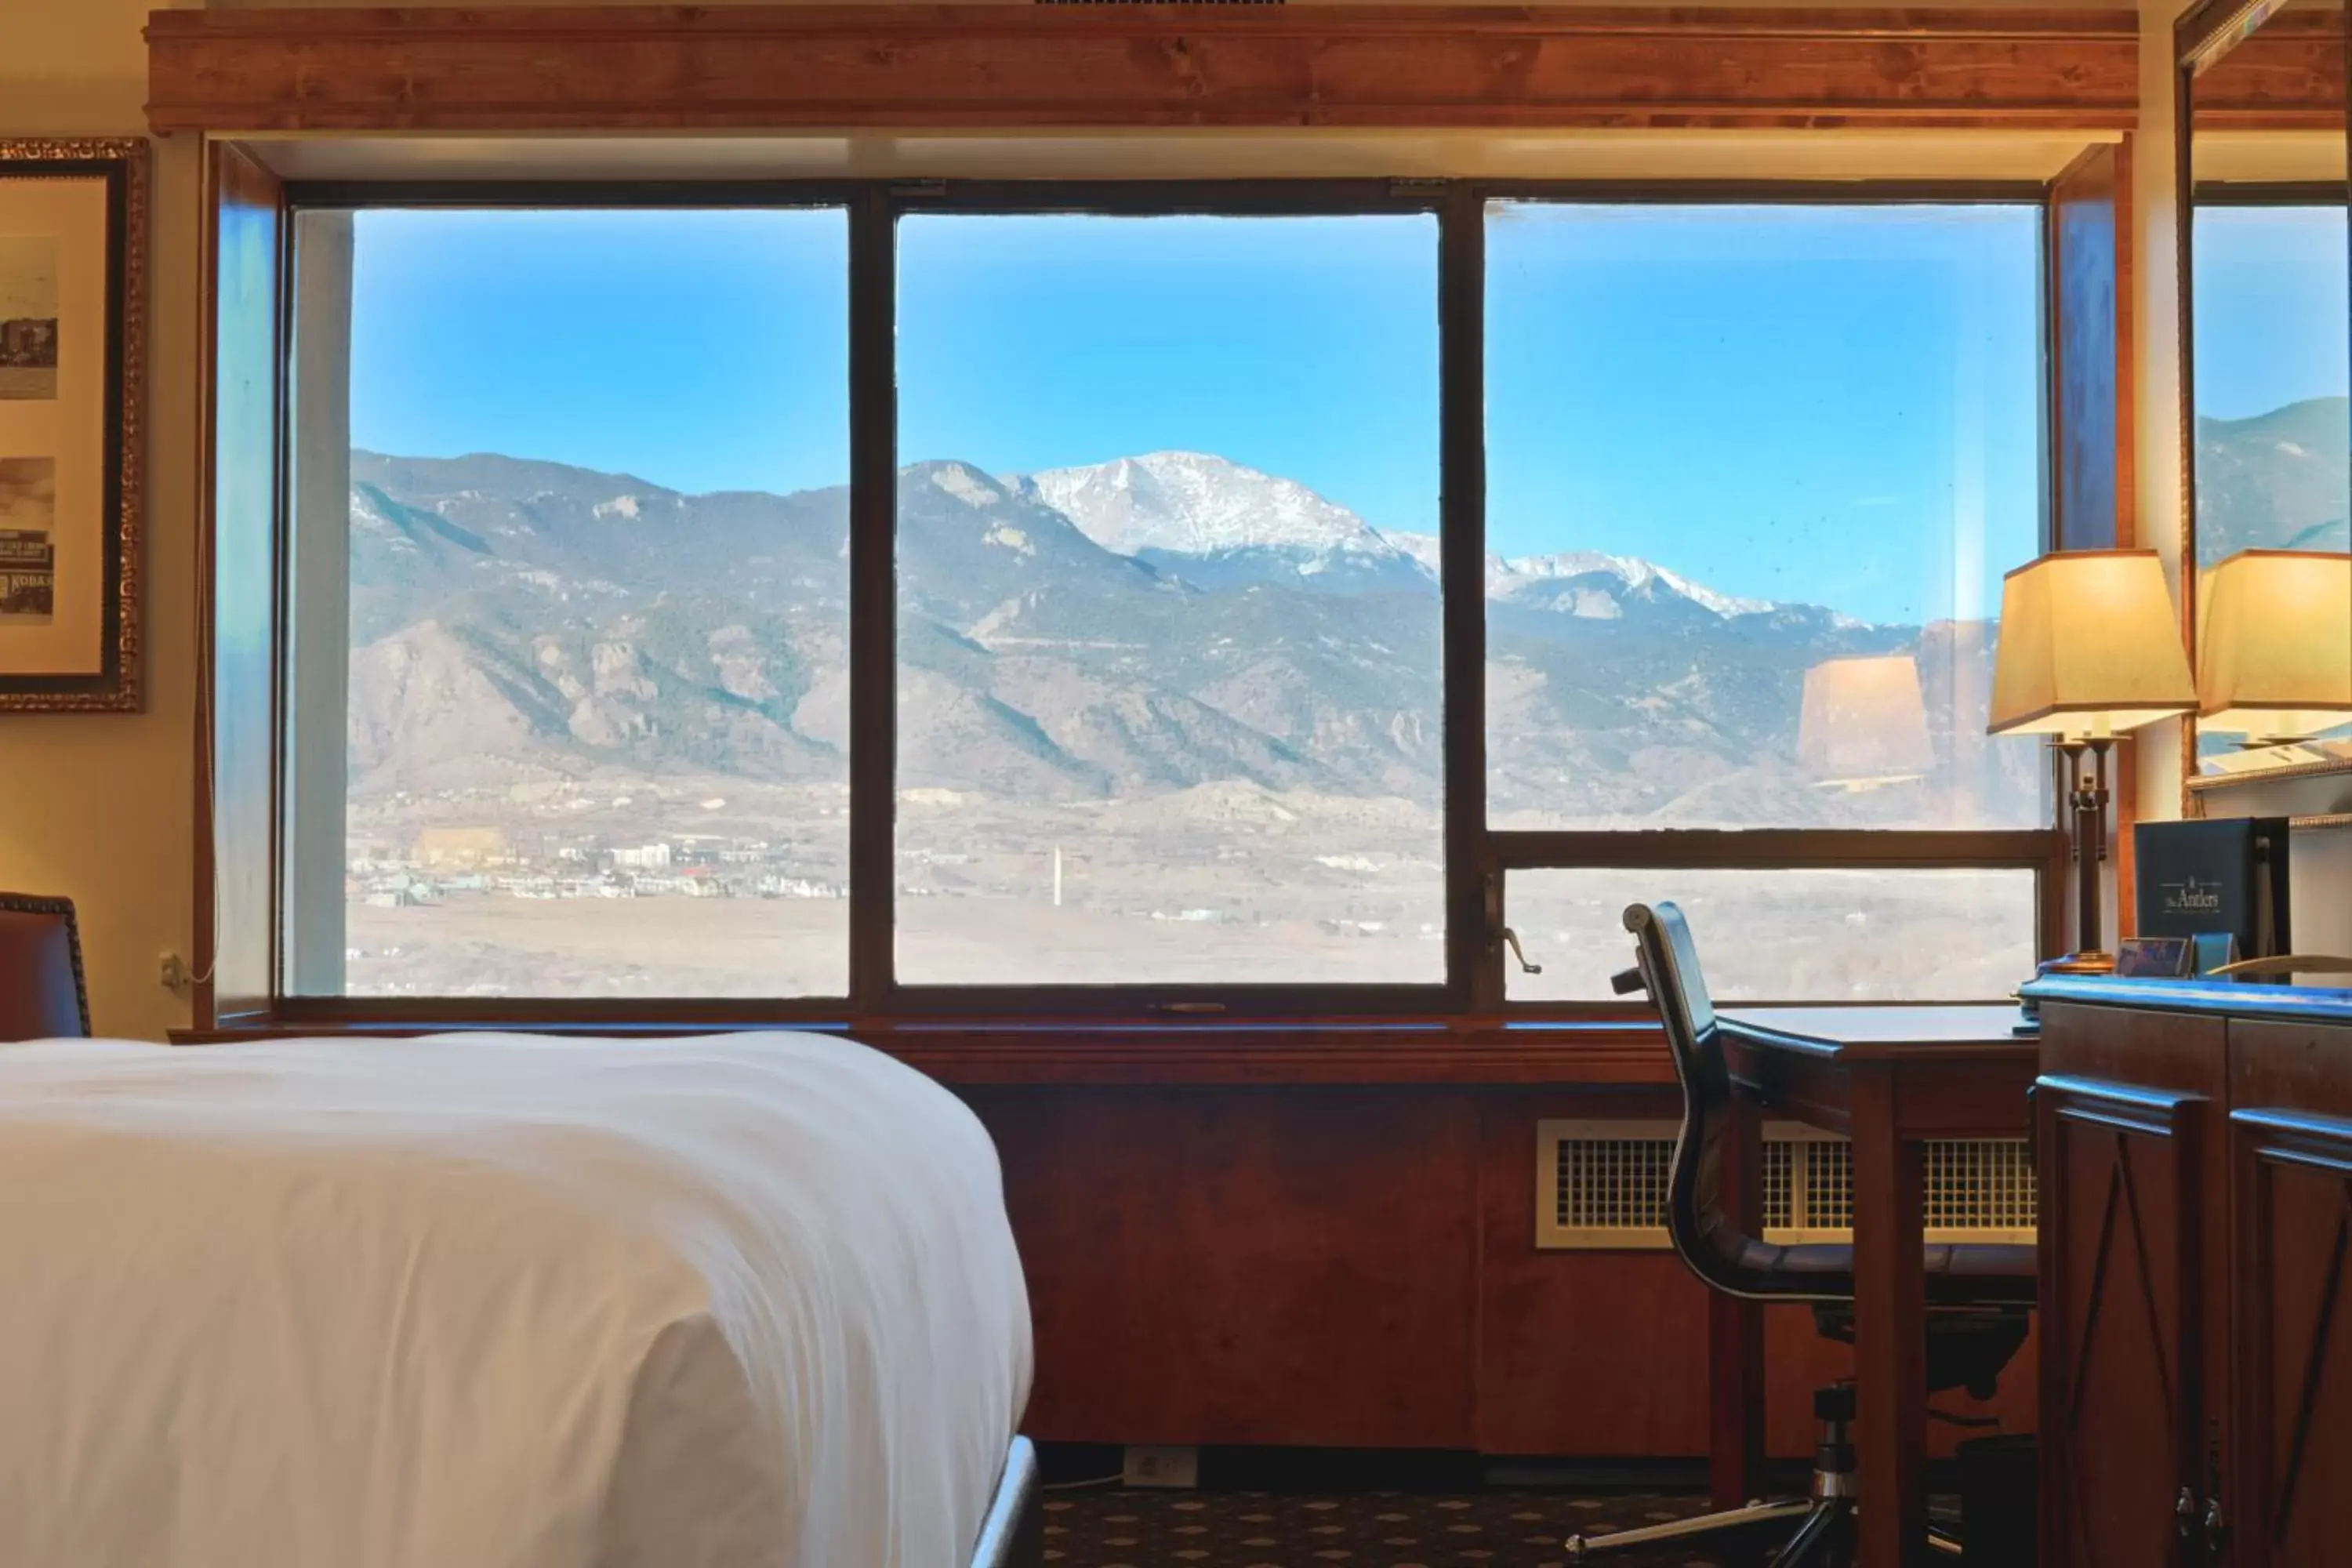 Bed, Mountain View in The Antlers, A Wyndham Hotel